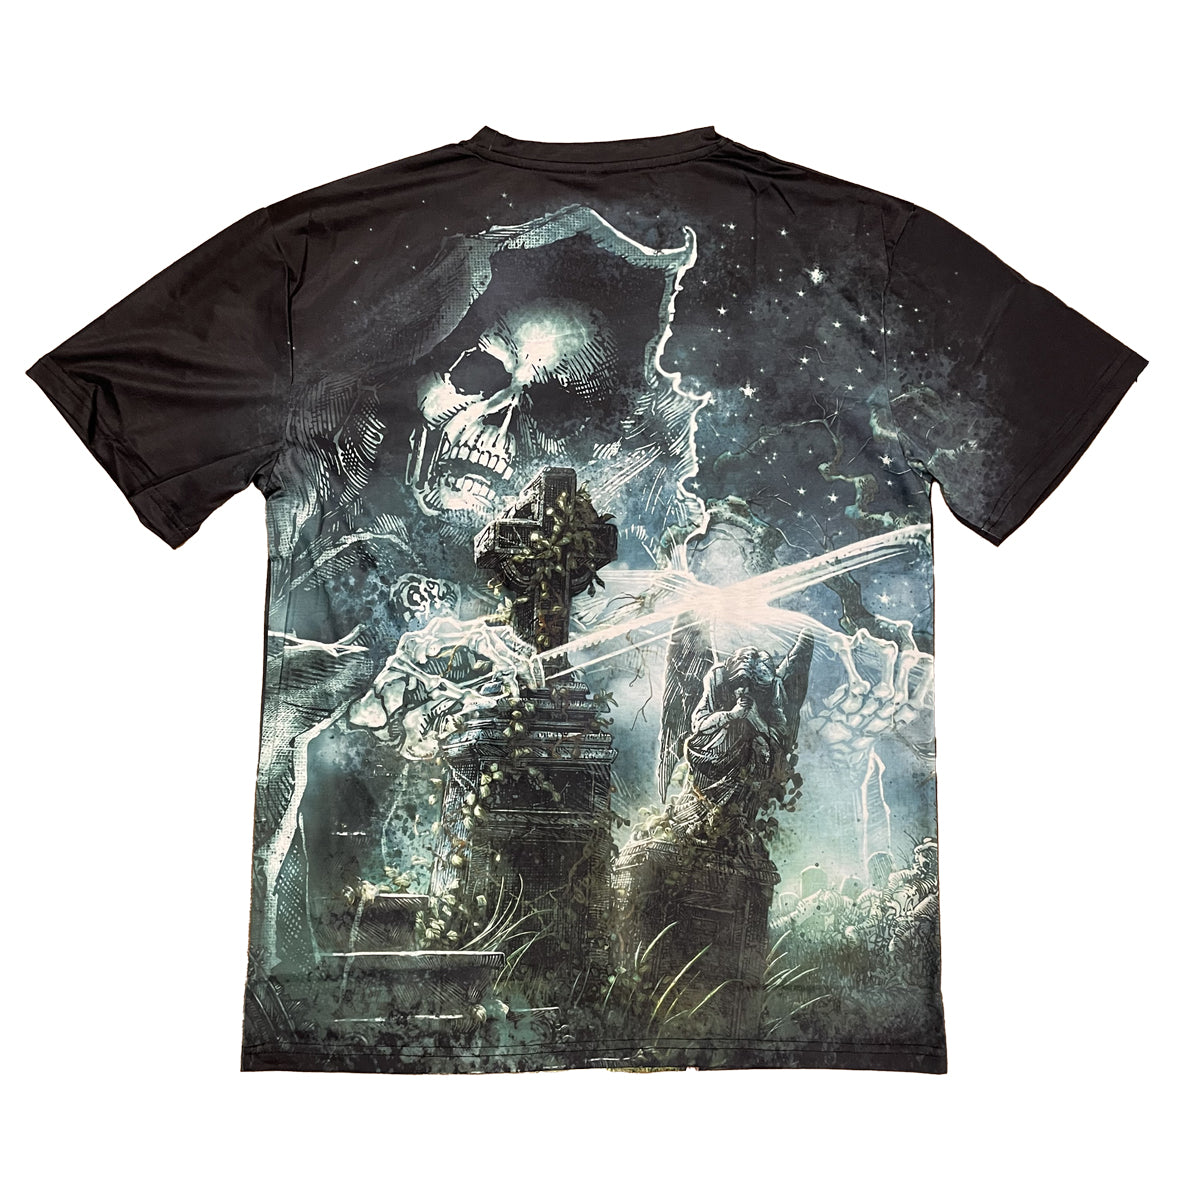 DEMONS & WIZARDS The Fiddler Sublimated Multicolor T-Shirt